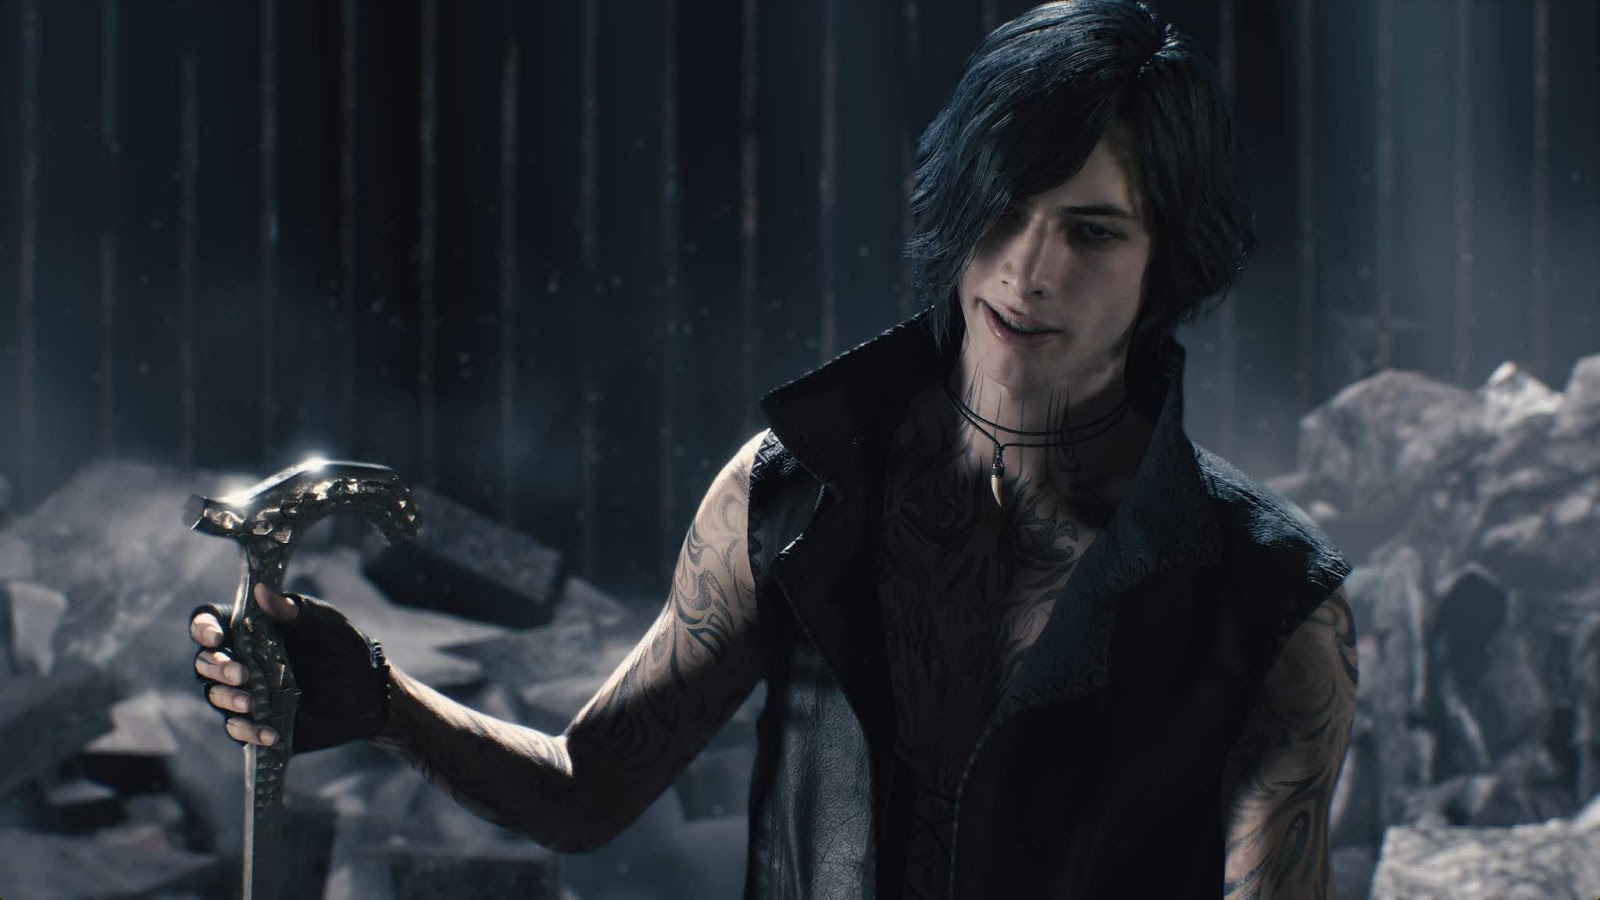 DEVIL MAY CRY 5 - TODOS OS PERSONAGENS SUPER 